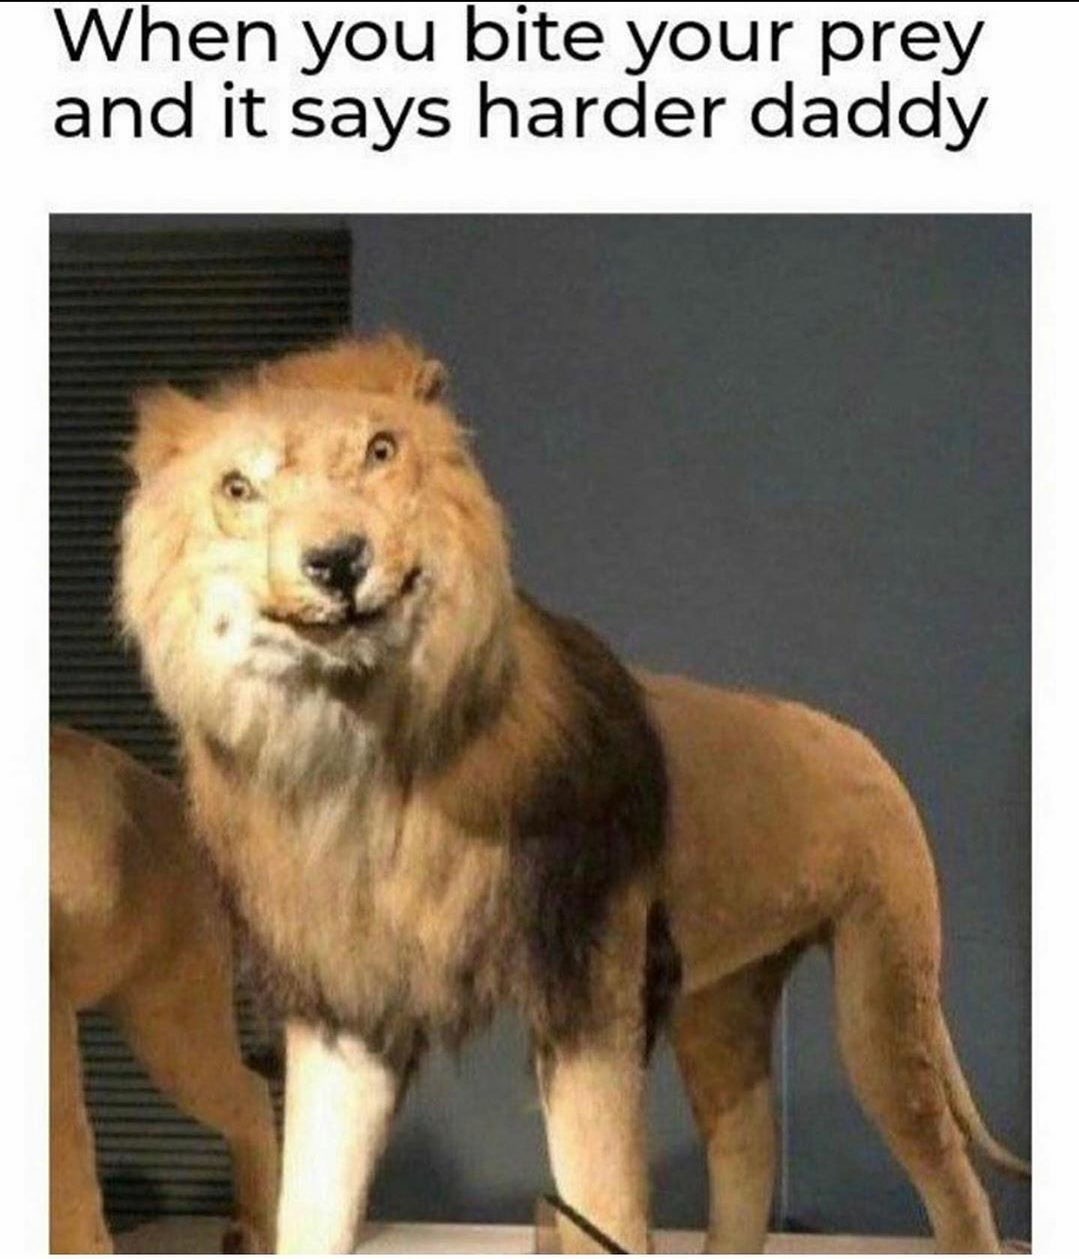 harder daddy lion meme - When you bite your prey and it says harder daddy